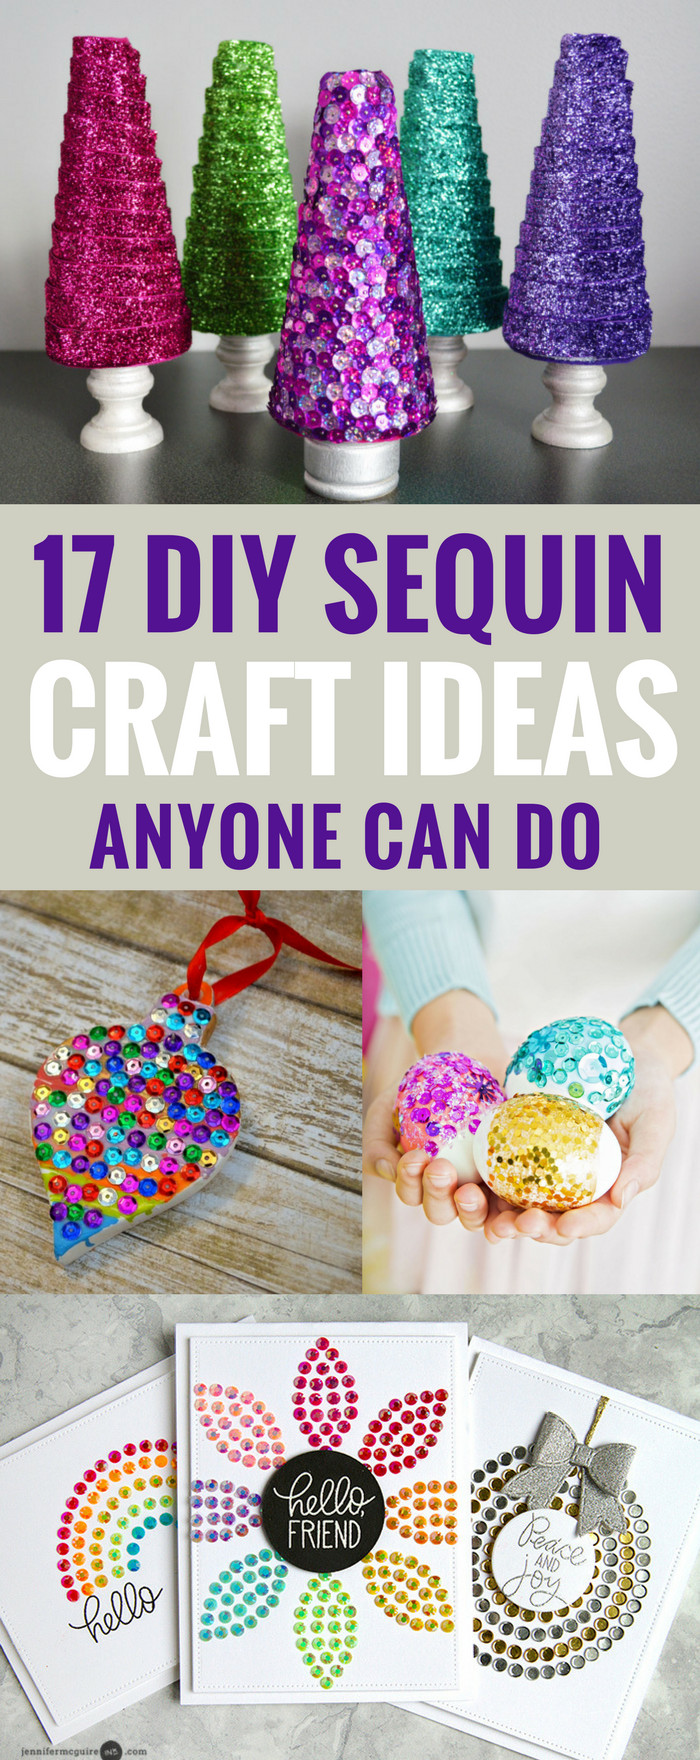 DIY Kids Projects
 17 DIY Sequin Crafts Ideas Anyone Can Do